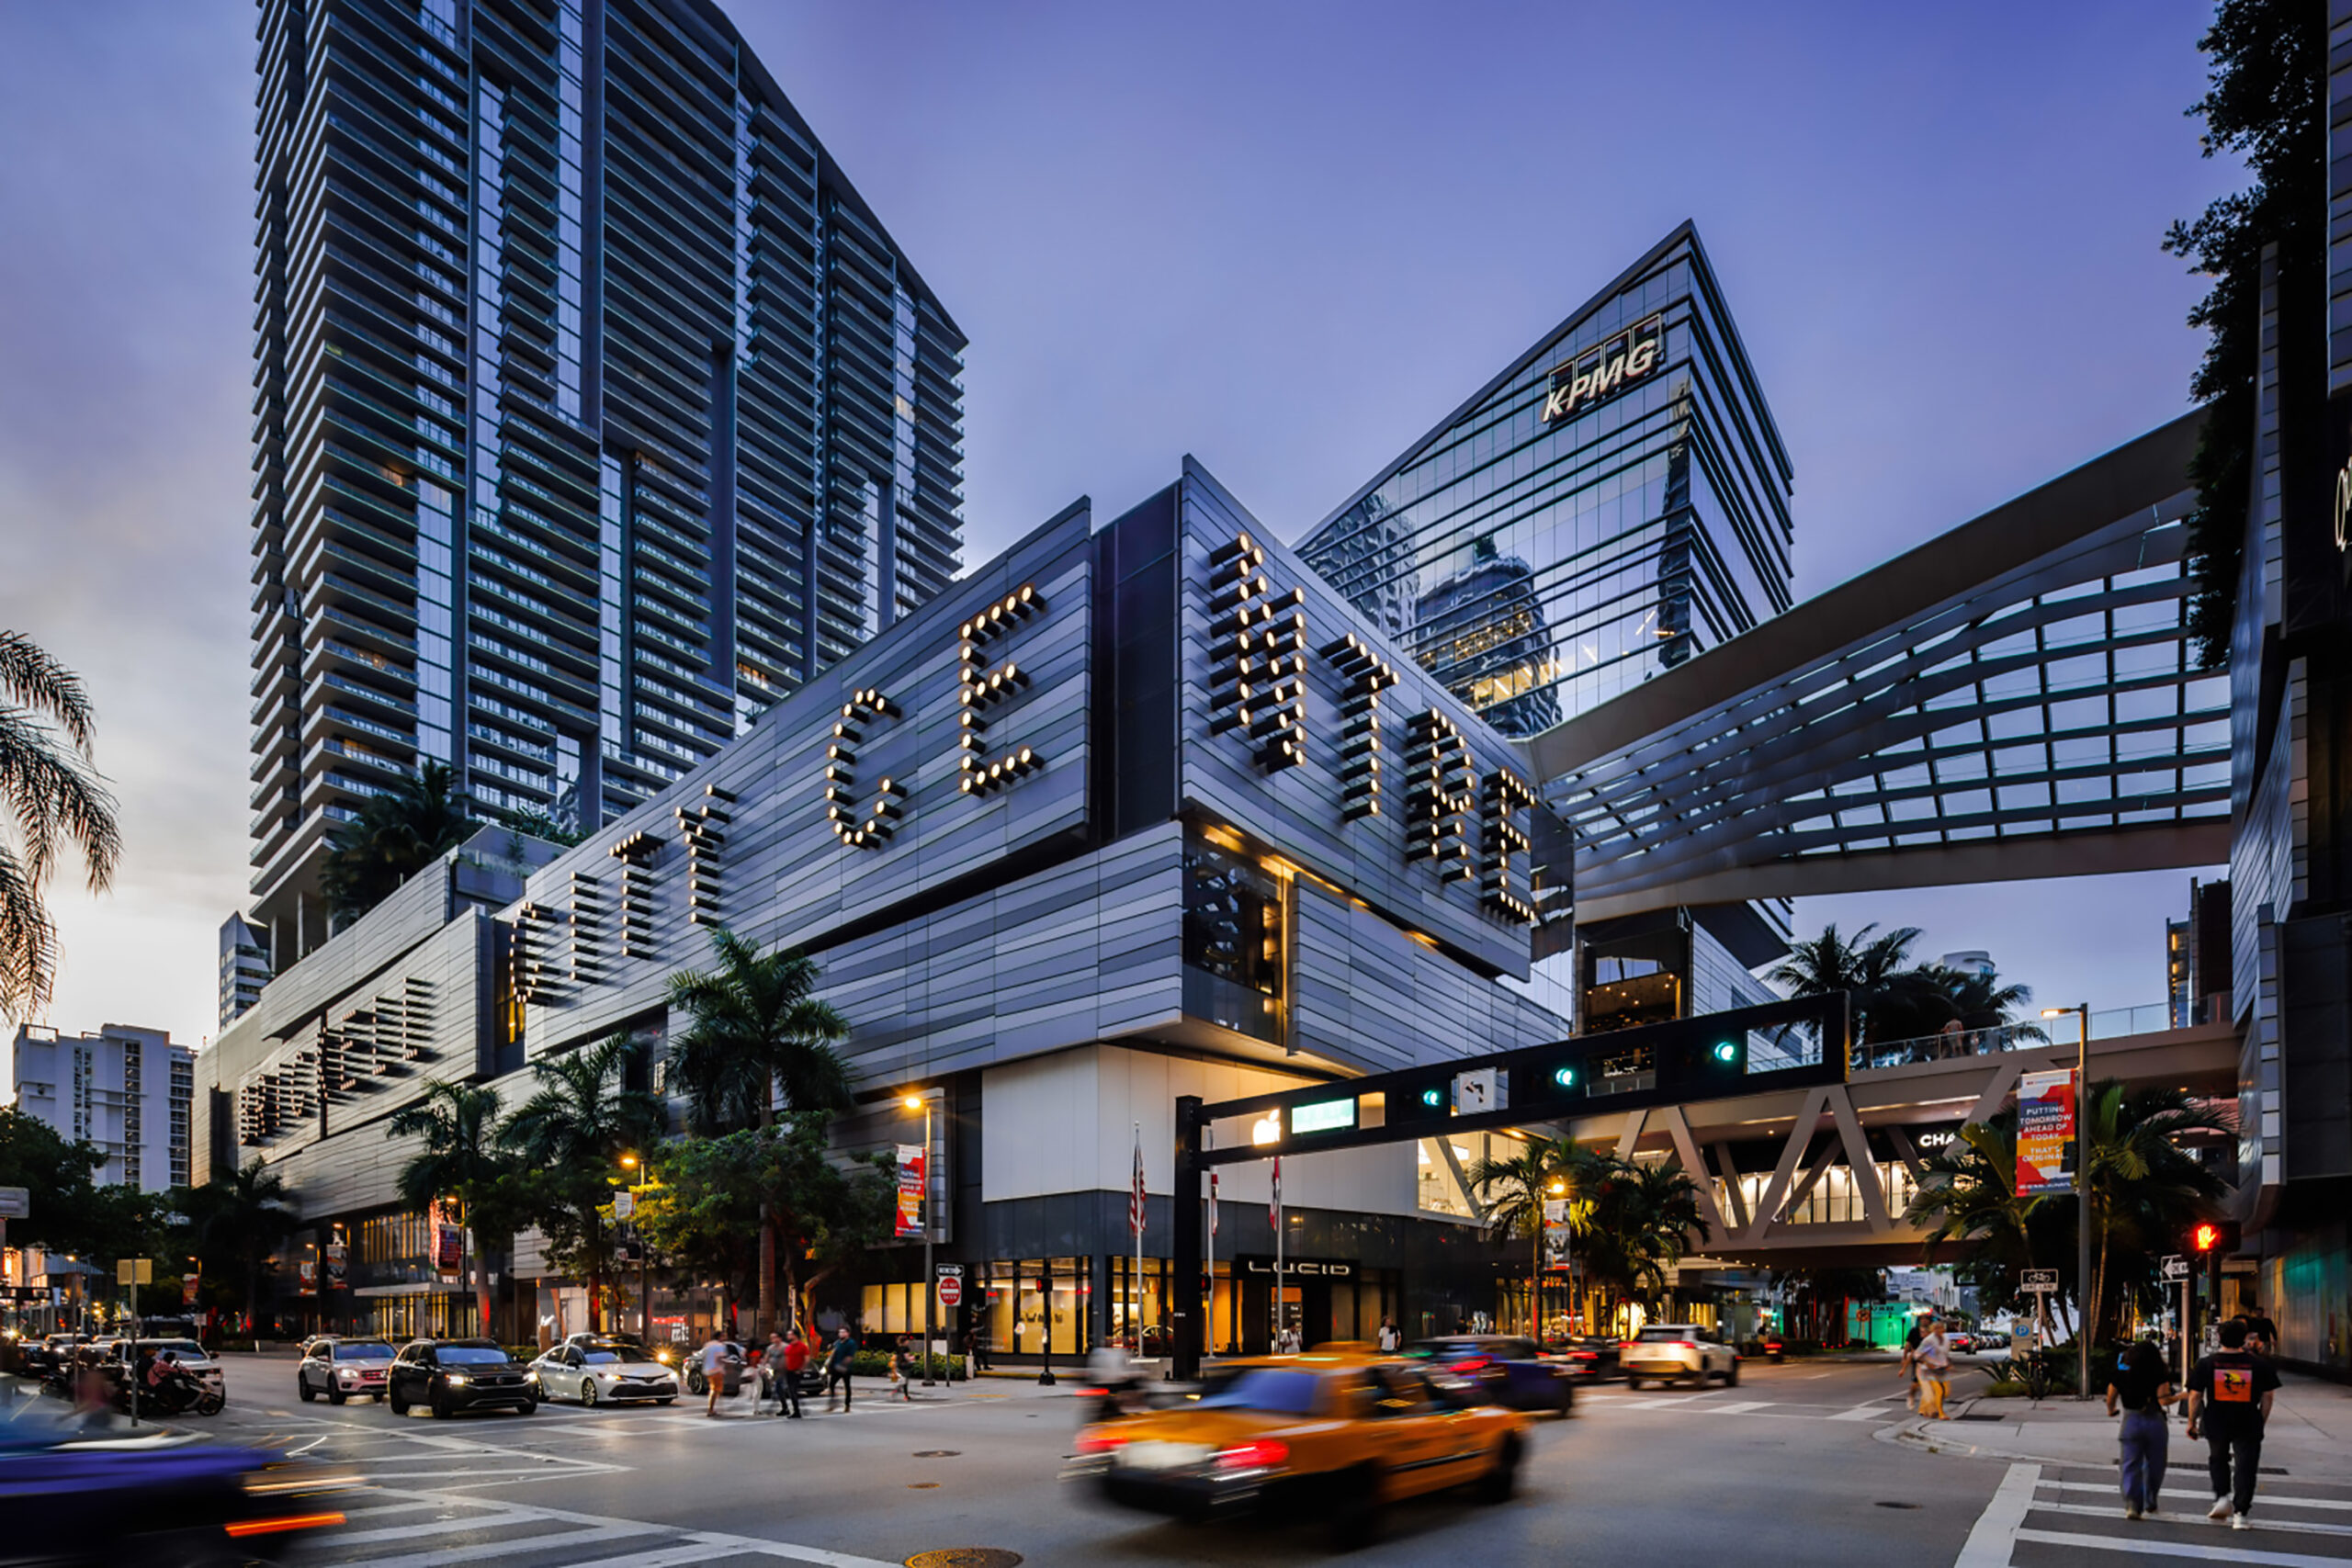 Brickell City Centre Mall Surpasses 97% Occupancy, Experiences Upward Trend in Retail Sales